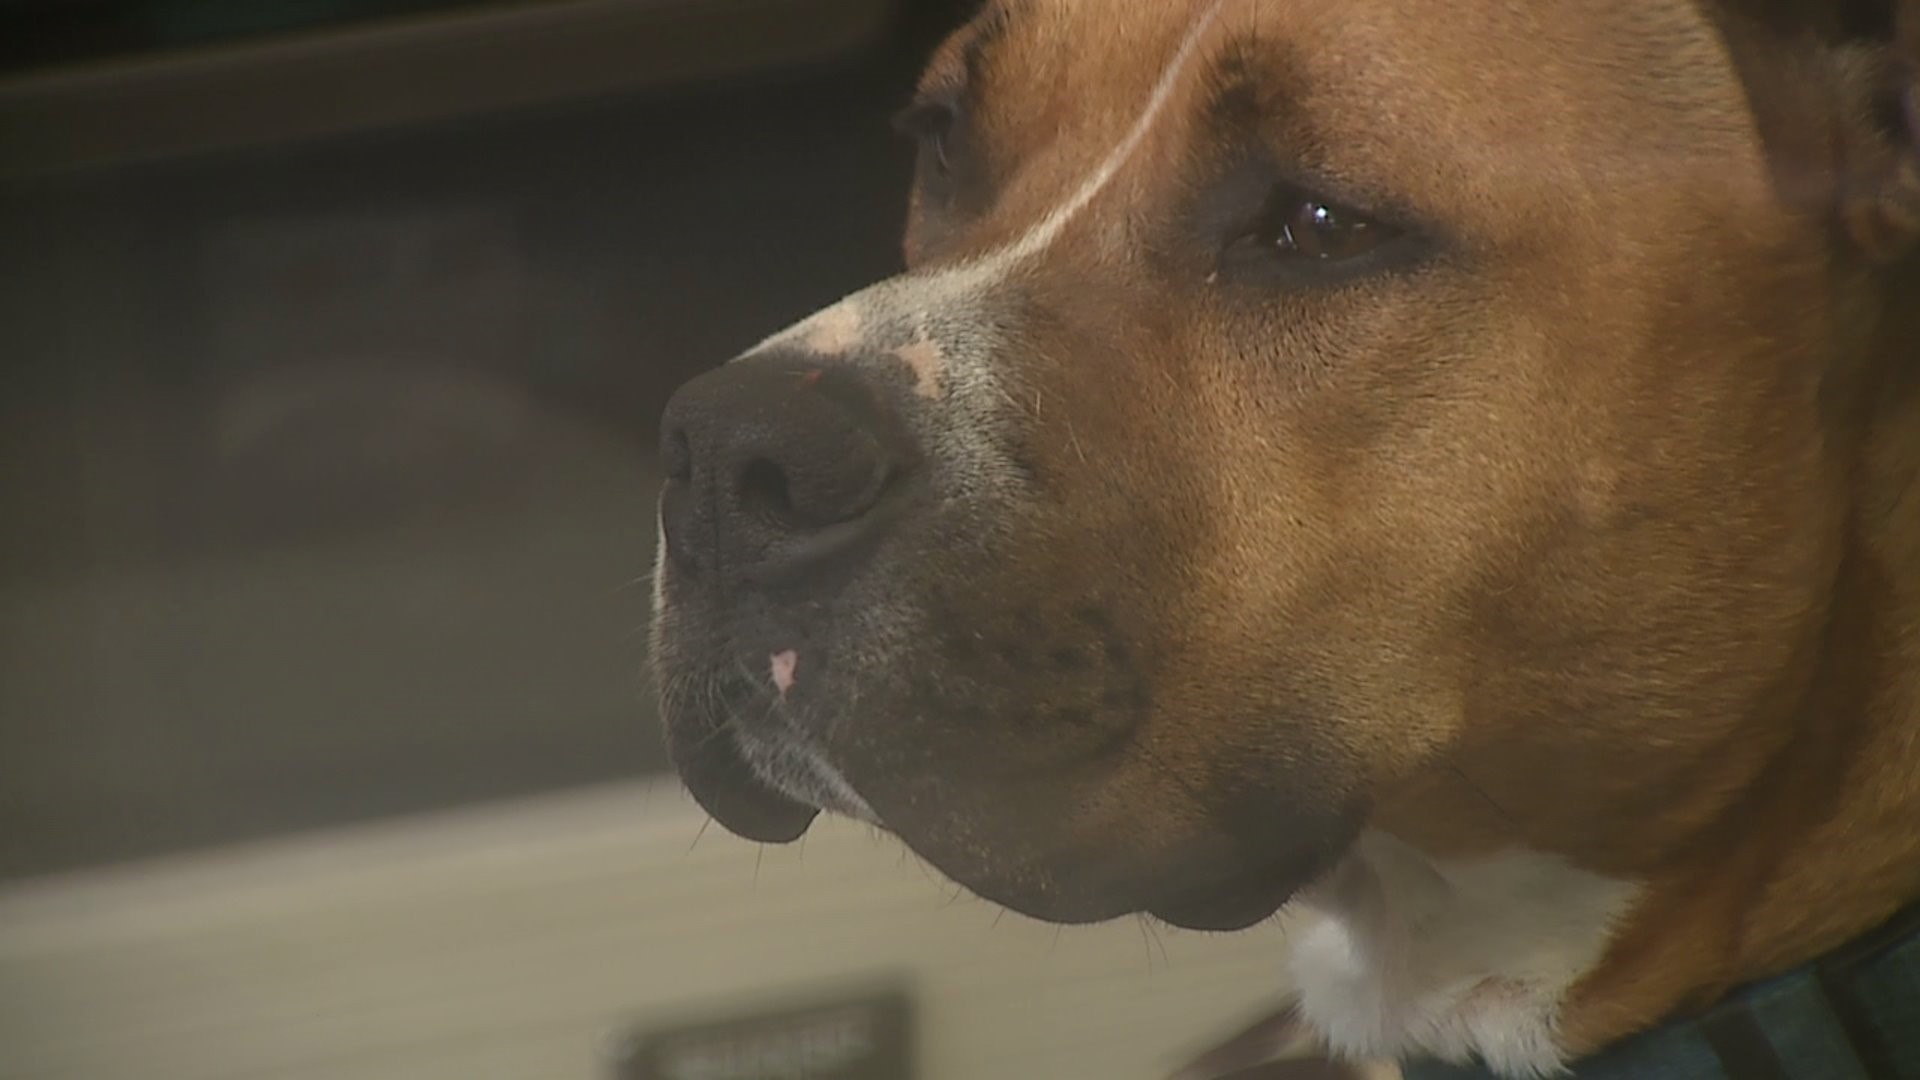 GMA features Knox County animal shelter